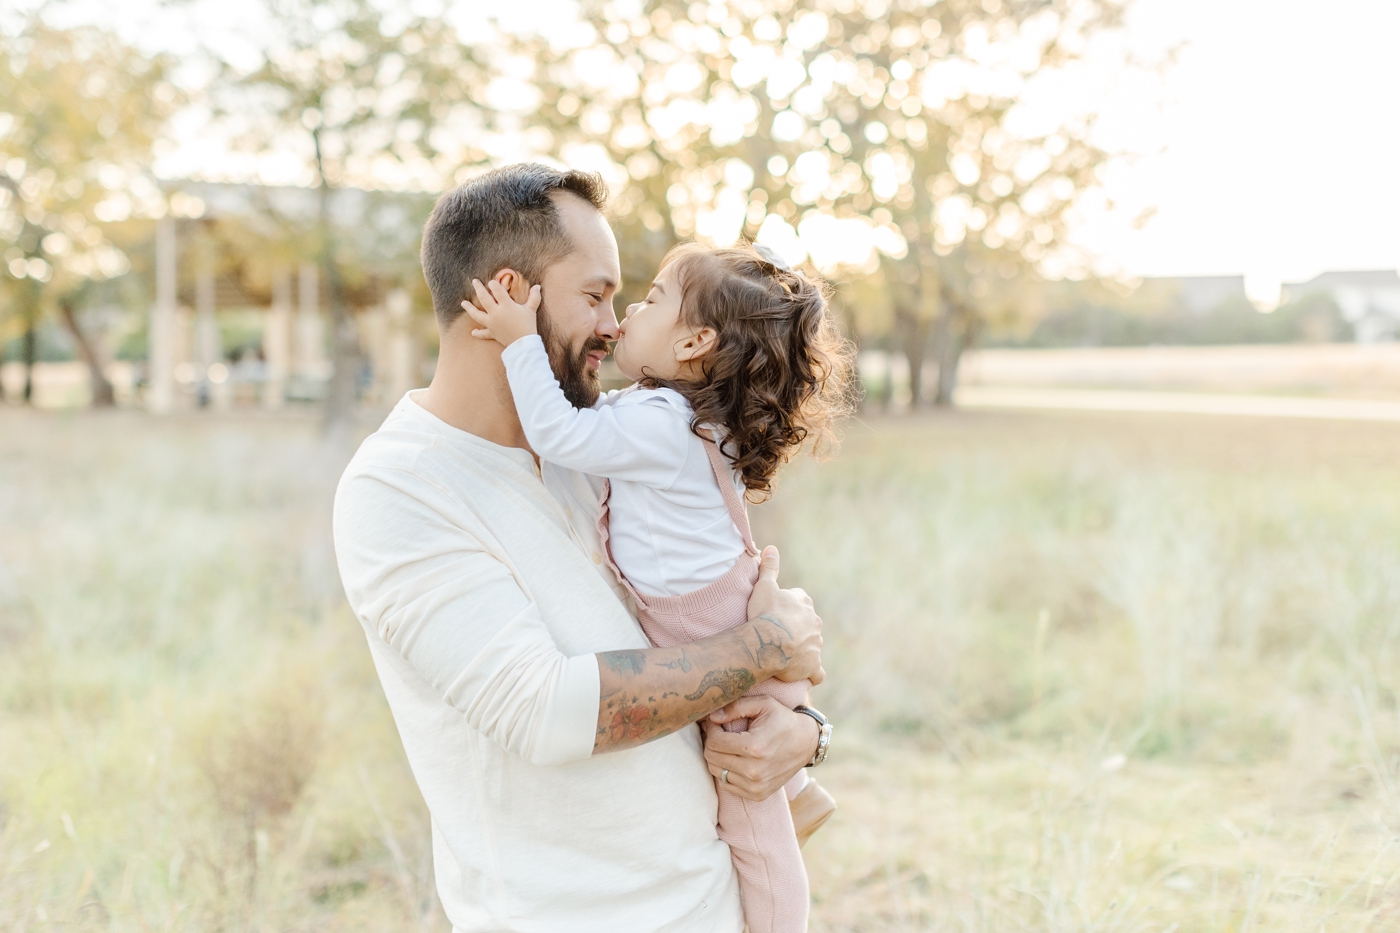 Little girl kisses Dad on nose during sweet moment in Austin, TX family portrait session. Photo by Sana Ahmed Photography.